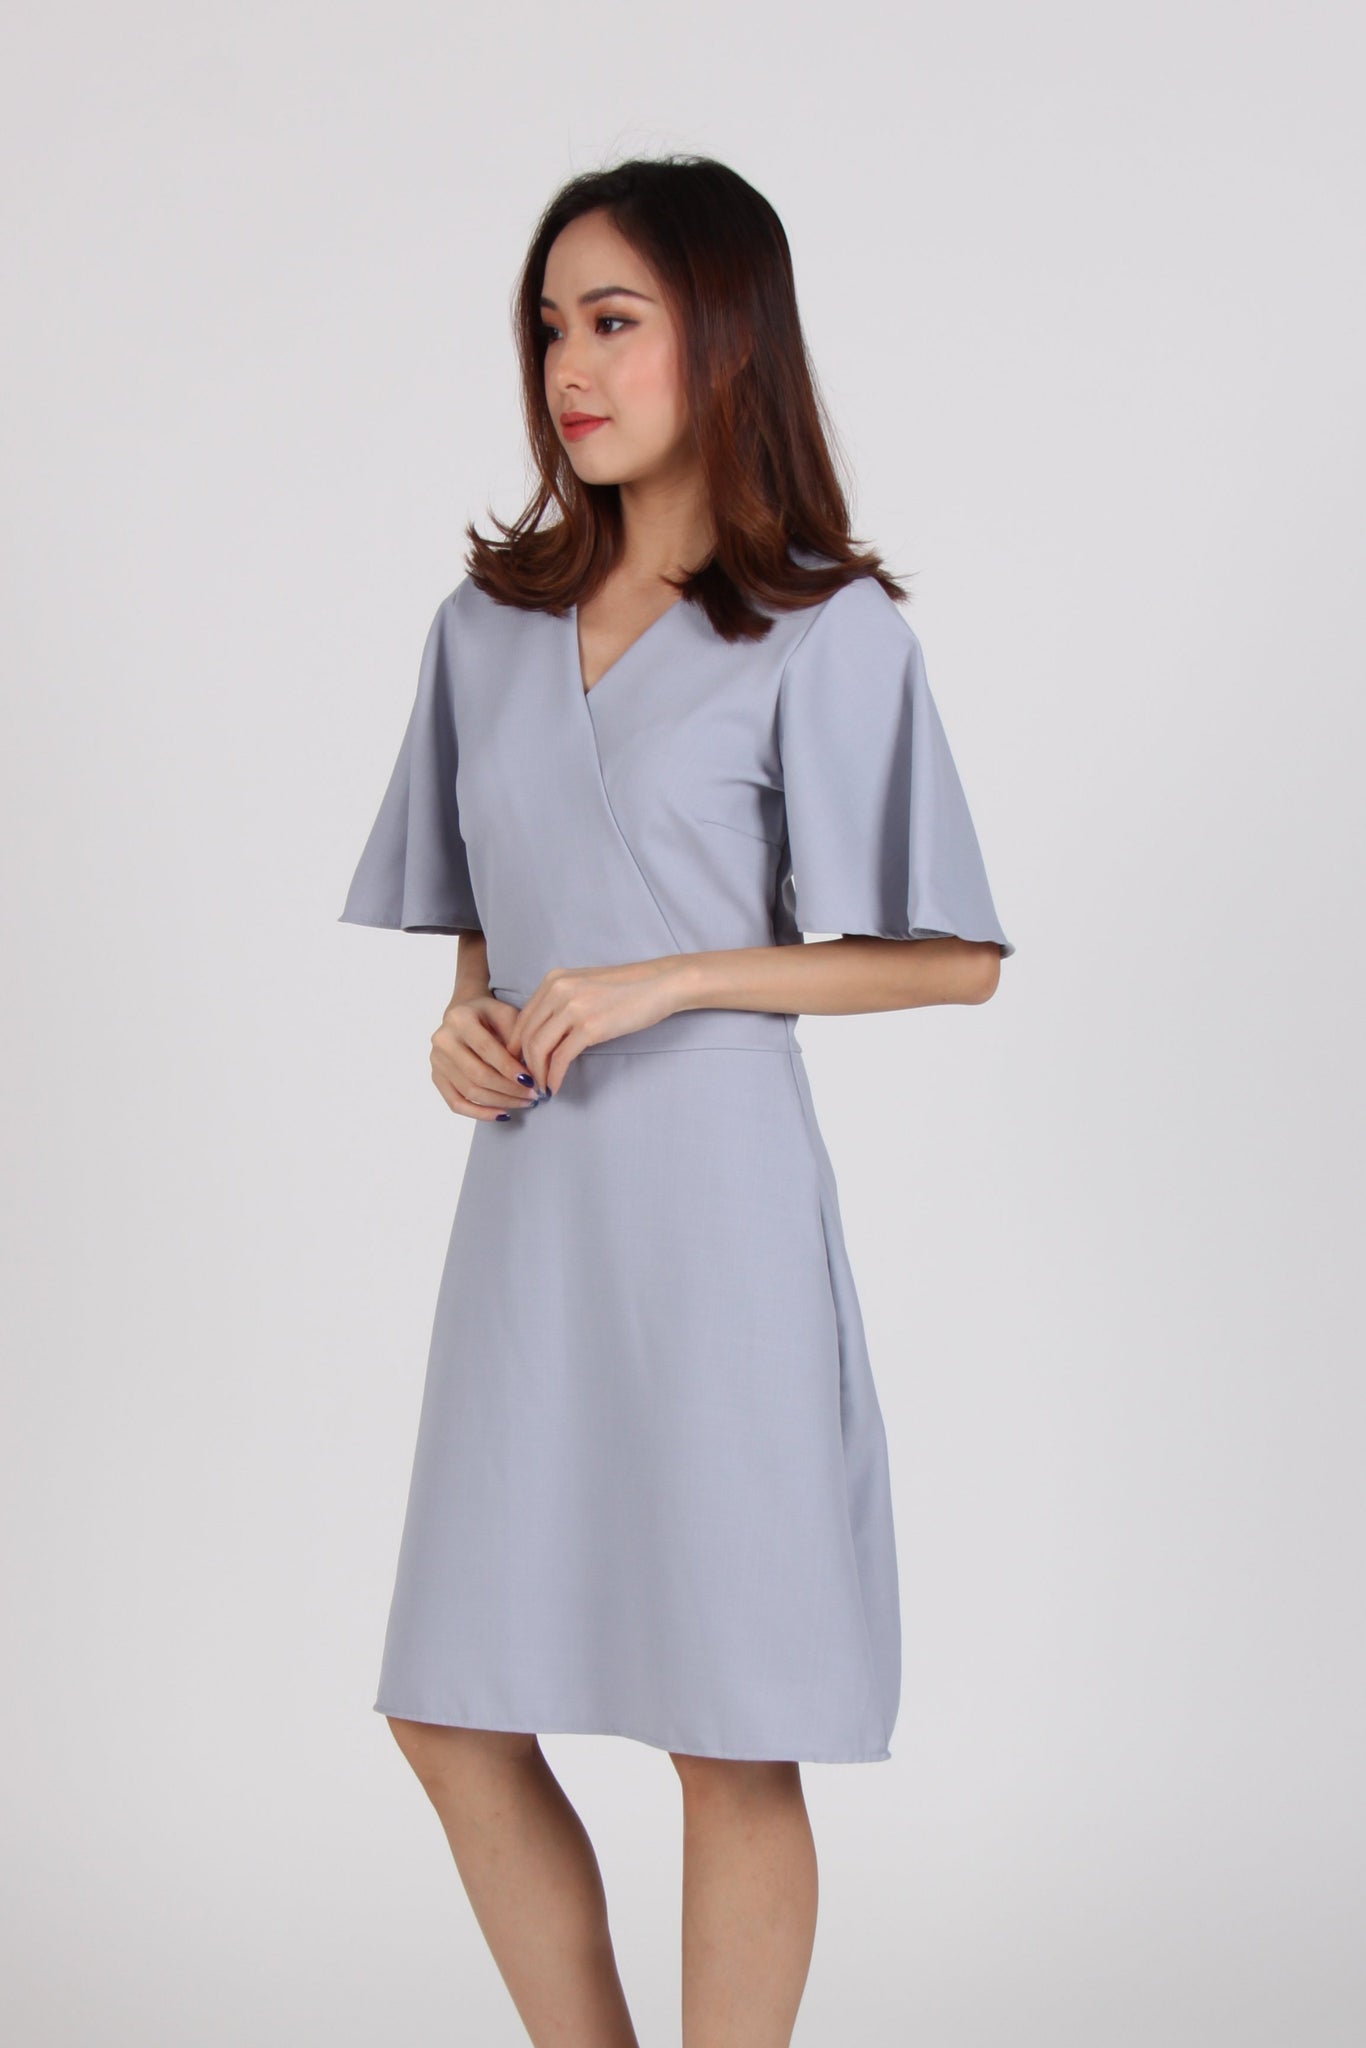 Bell Sleeves Wrap Front Dress in Light Blue